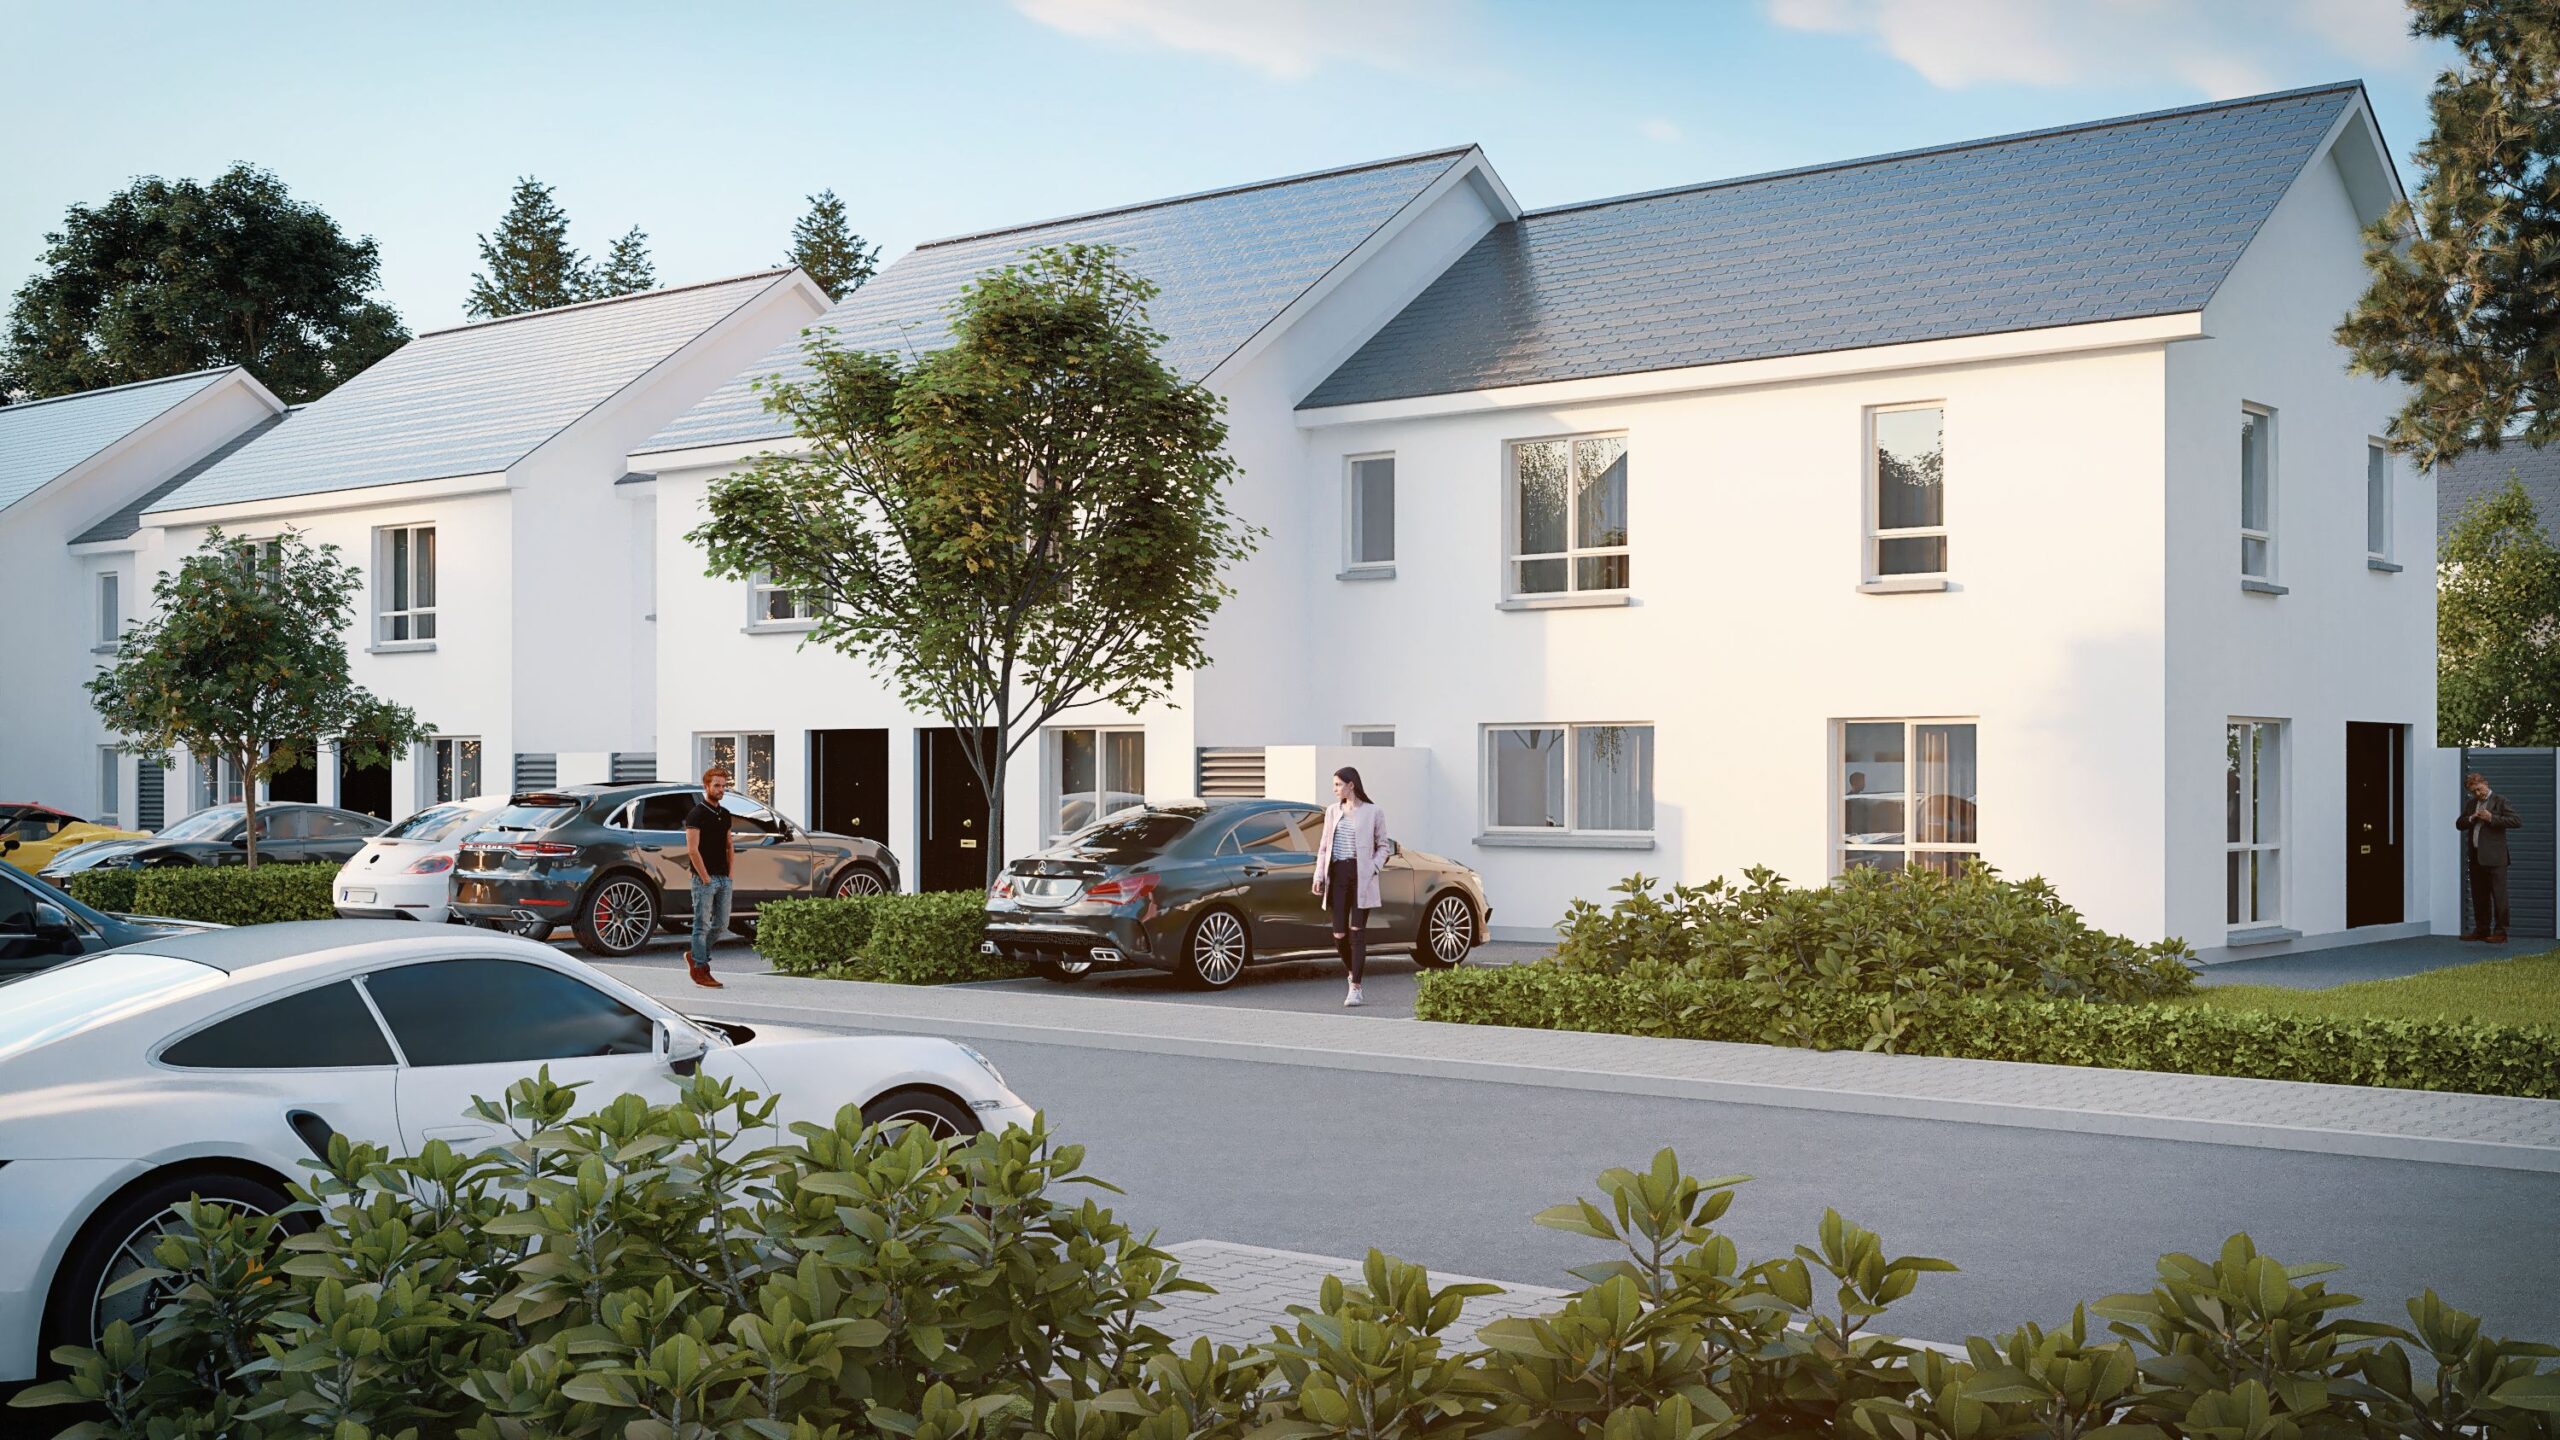 An affordable housing scheme in Newcastle West has been launched by Limerick City and County Council with prices starting from €250,000 for a three-bedroom mid-terrace house